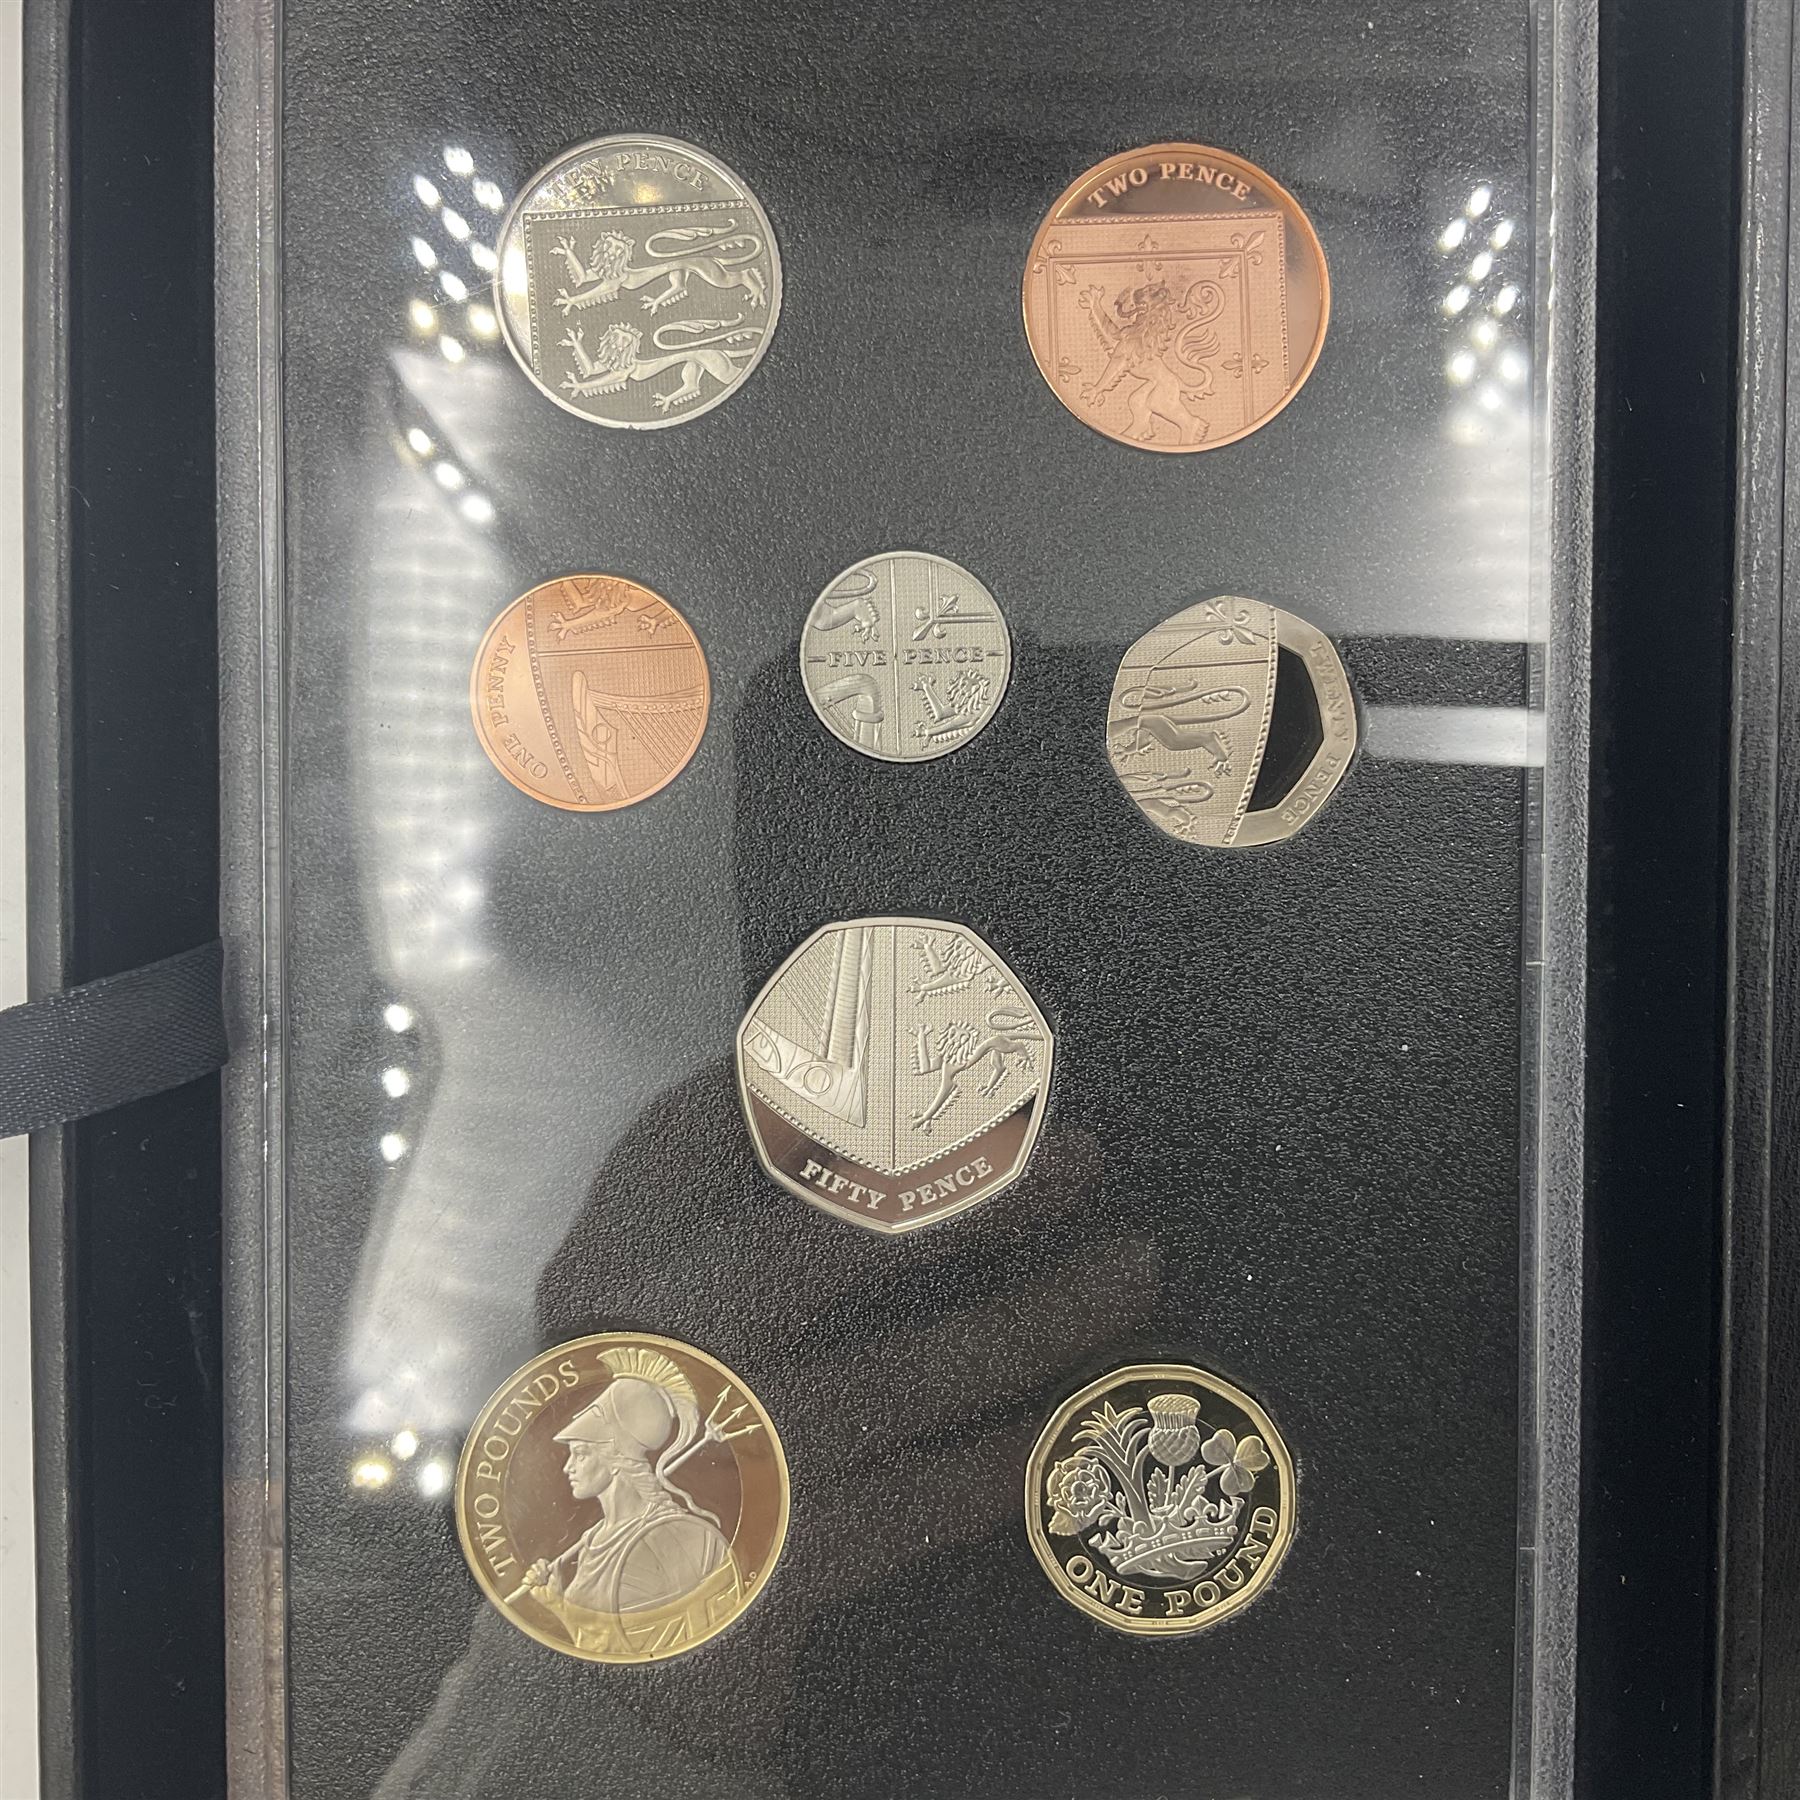 The Royal Mint United Kingdom 2021 proof coin set - Image 2 of 7